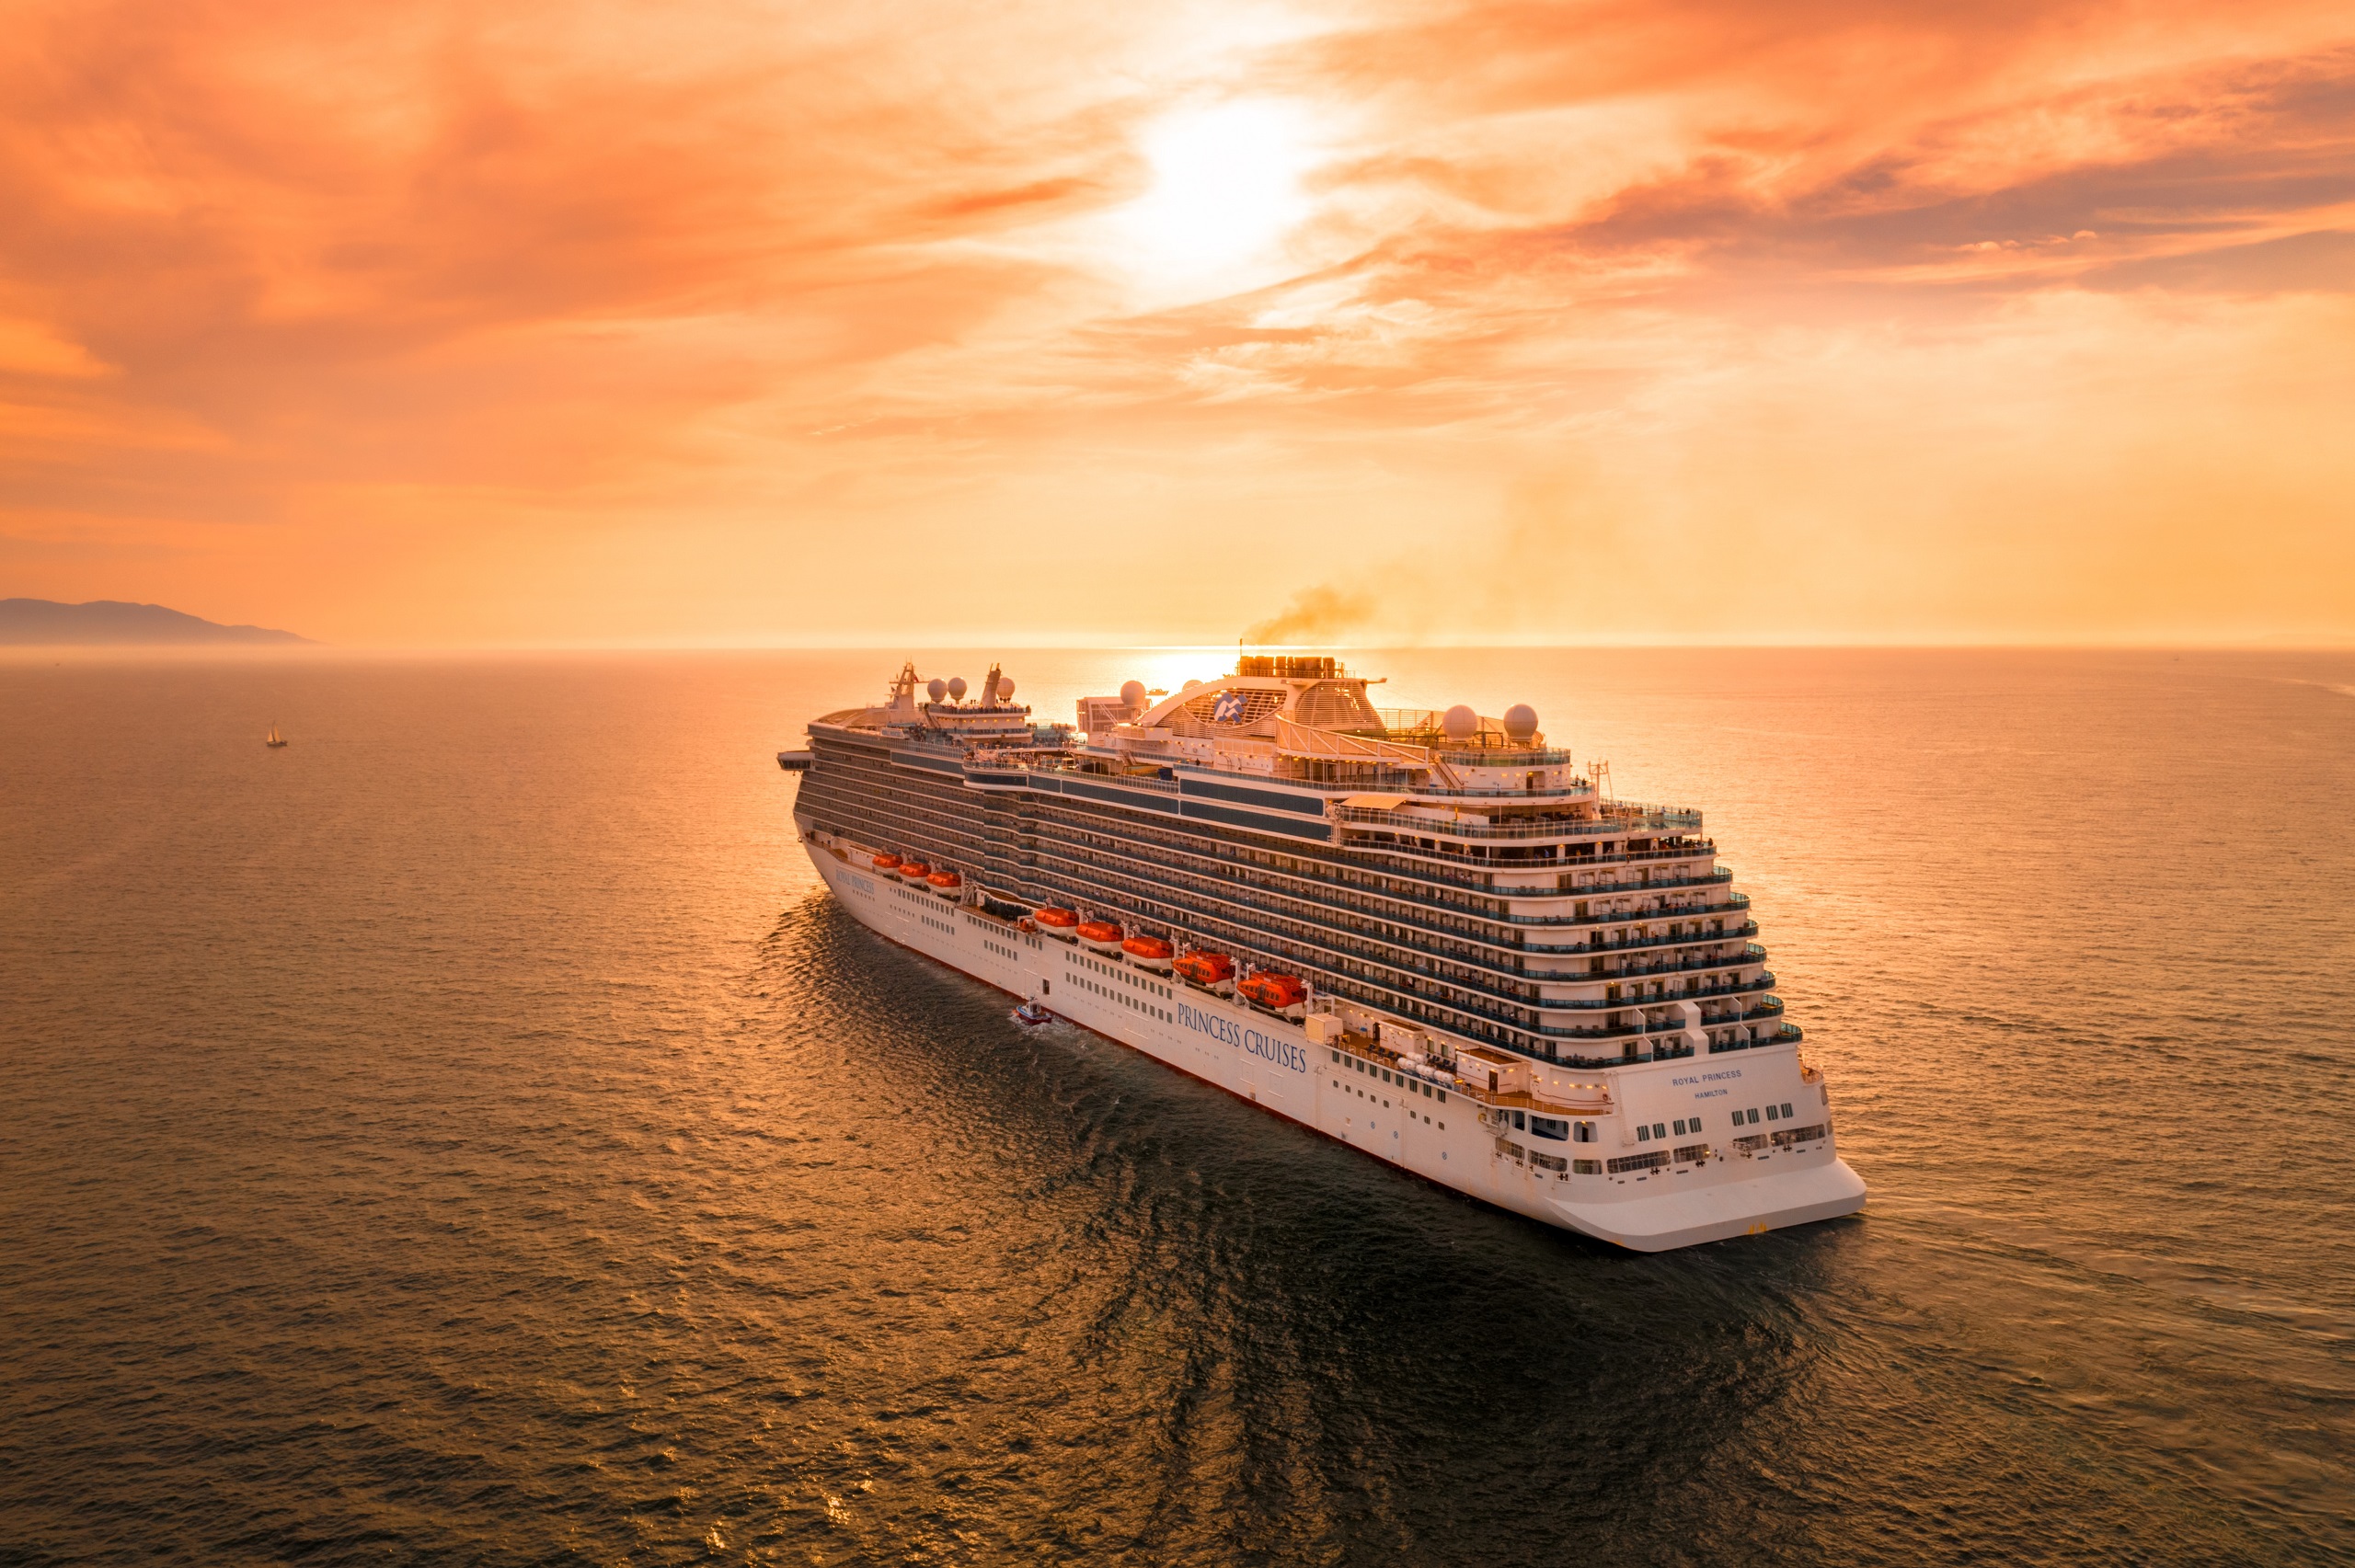 A cruise ships sails on the ocean at sunset